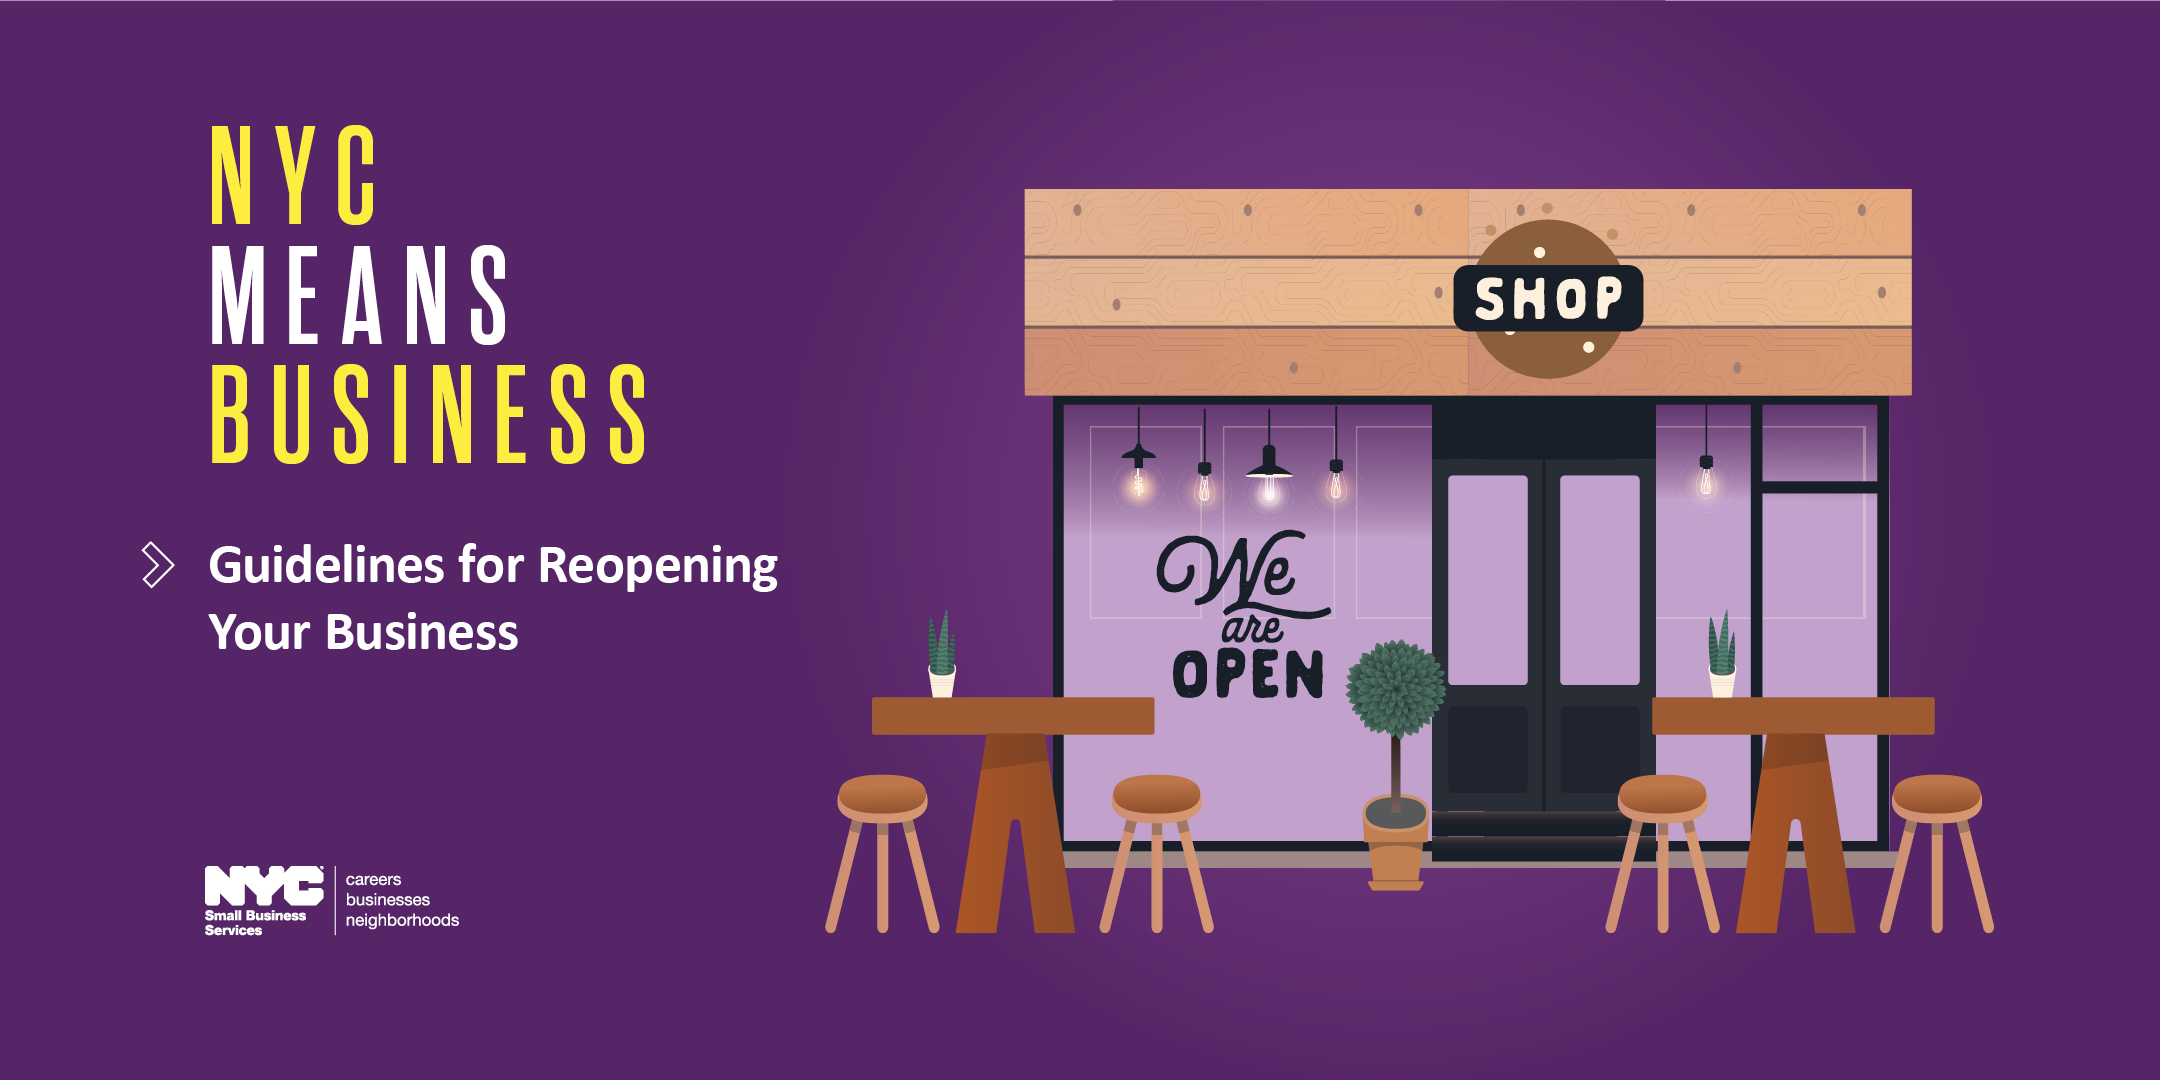 Storefront graphic with outdoor seating on a purple background with copy NYC Means Business > Guidelines for Reopening Your Business